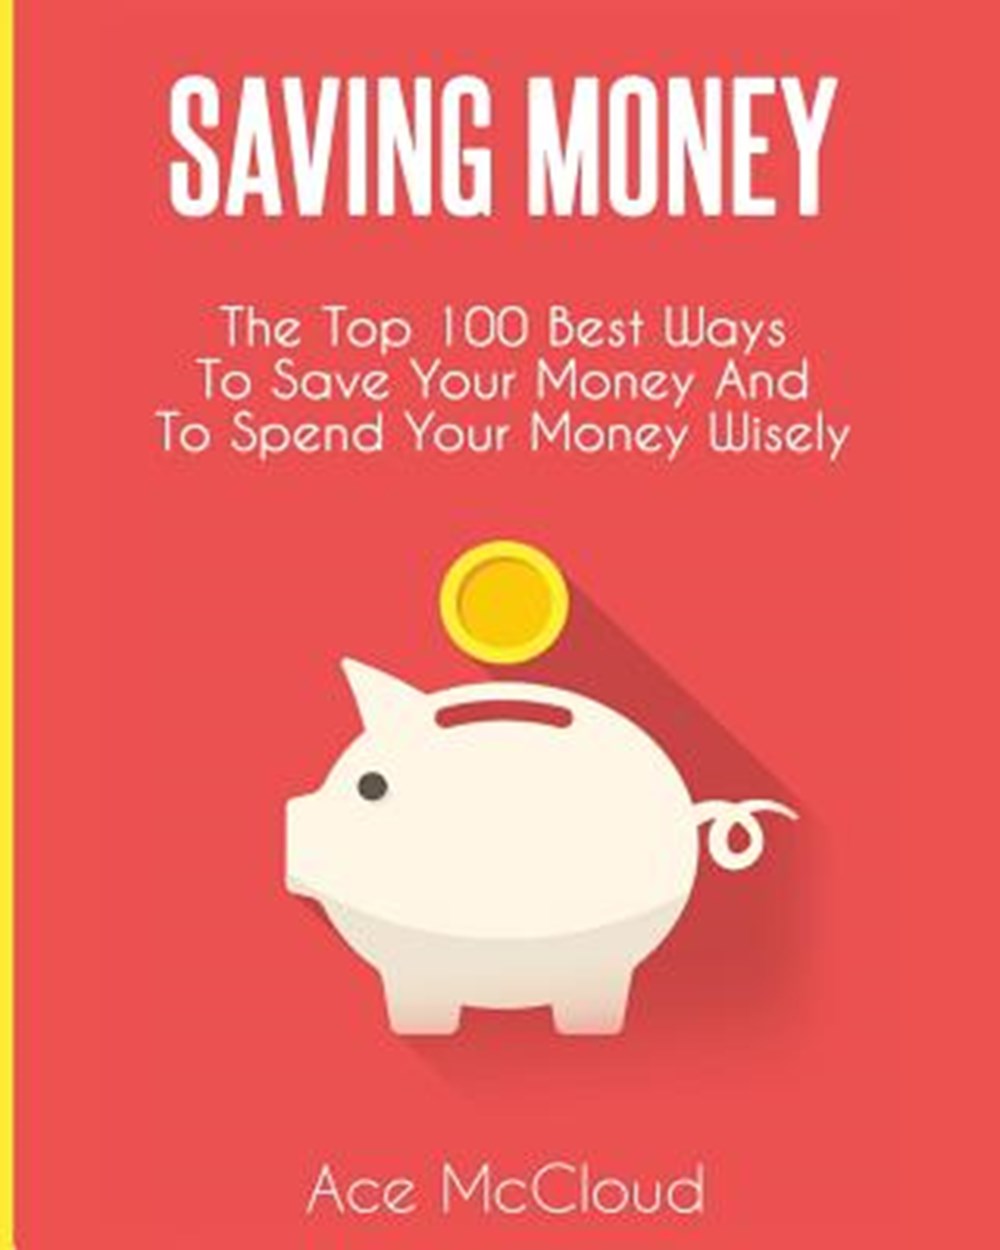 Saving Money The Top 100 Best Ways To Save Your Money And To Spend Your Money Wisely